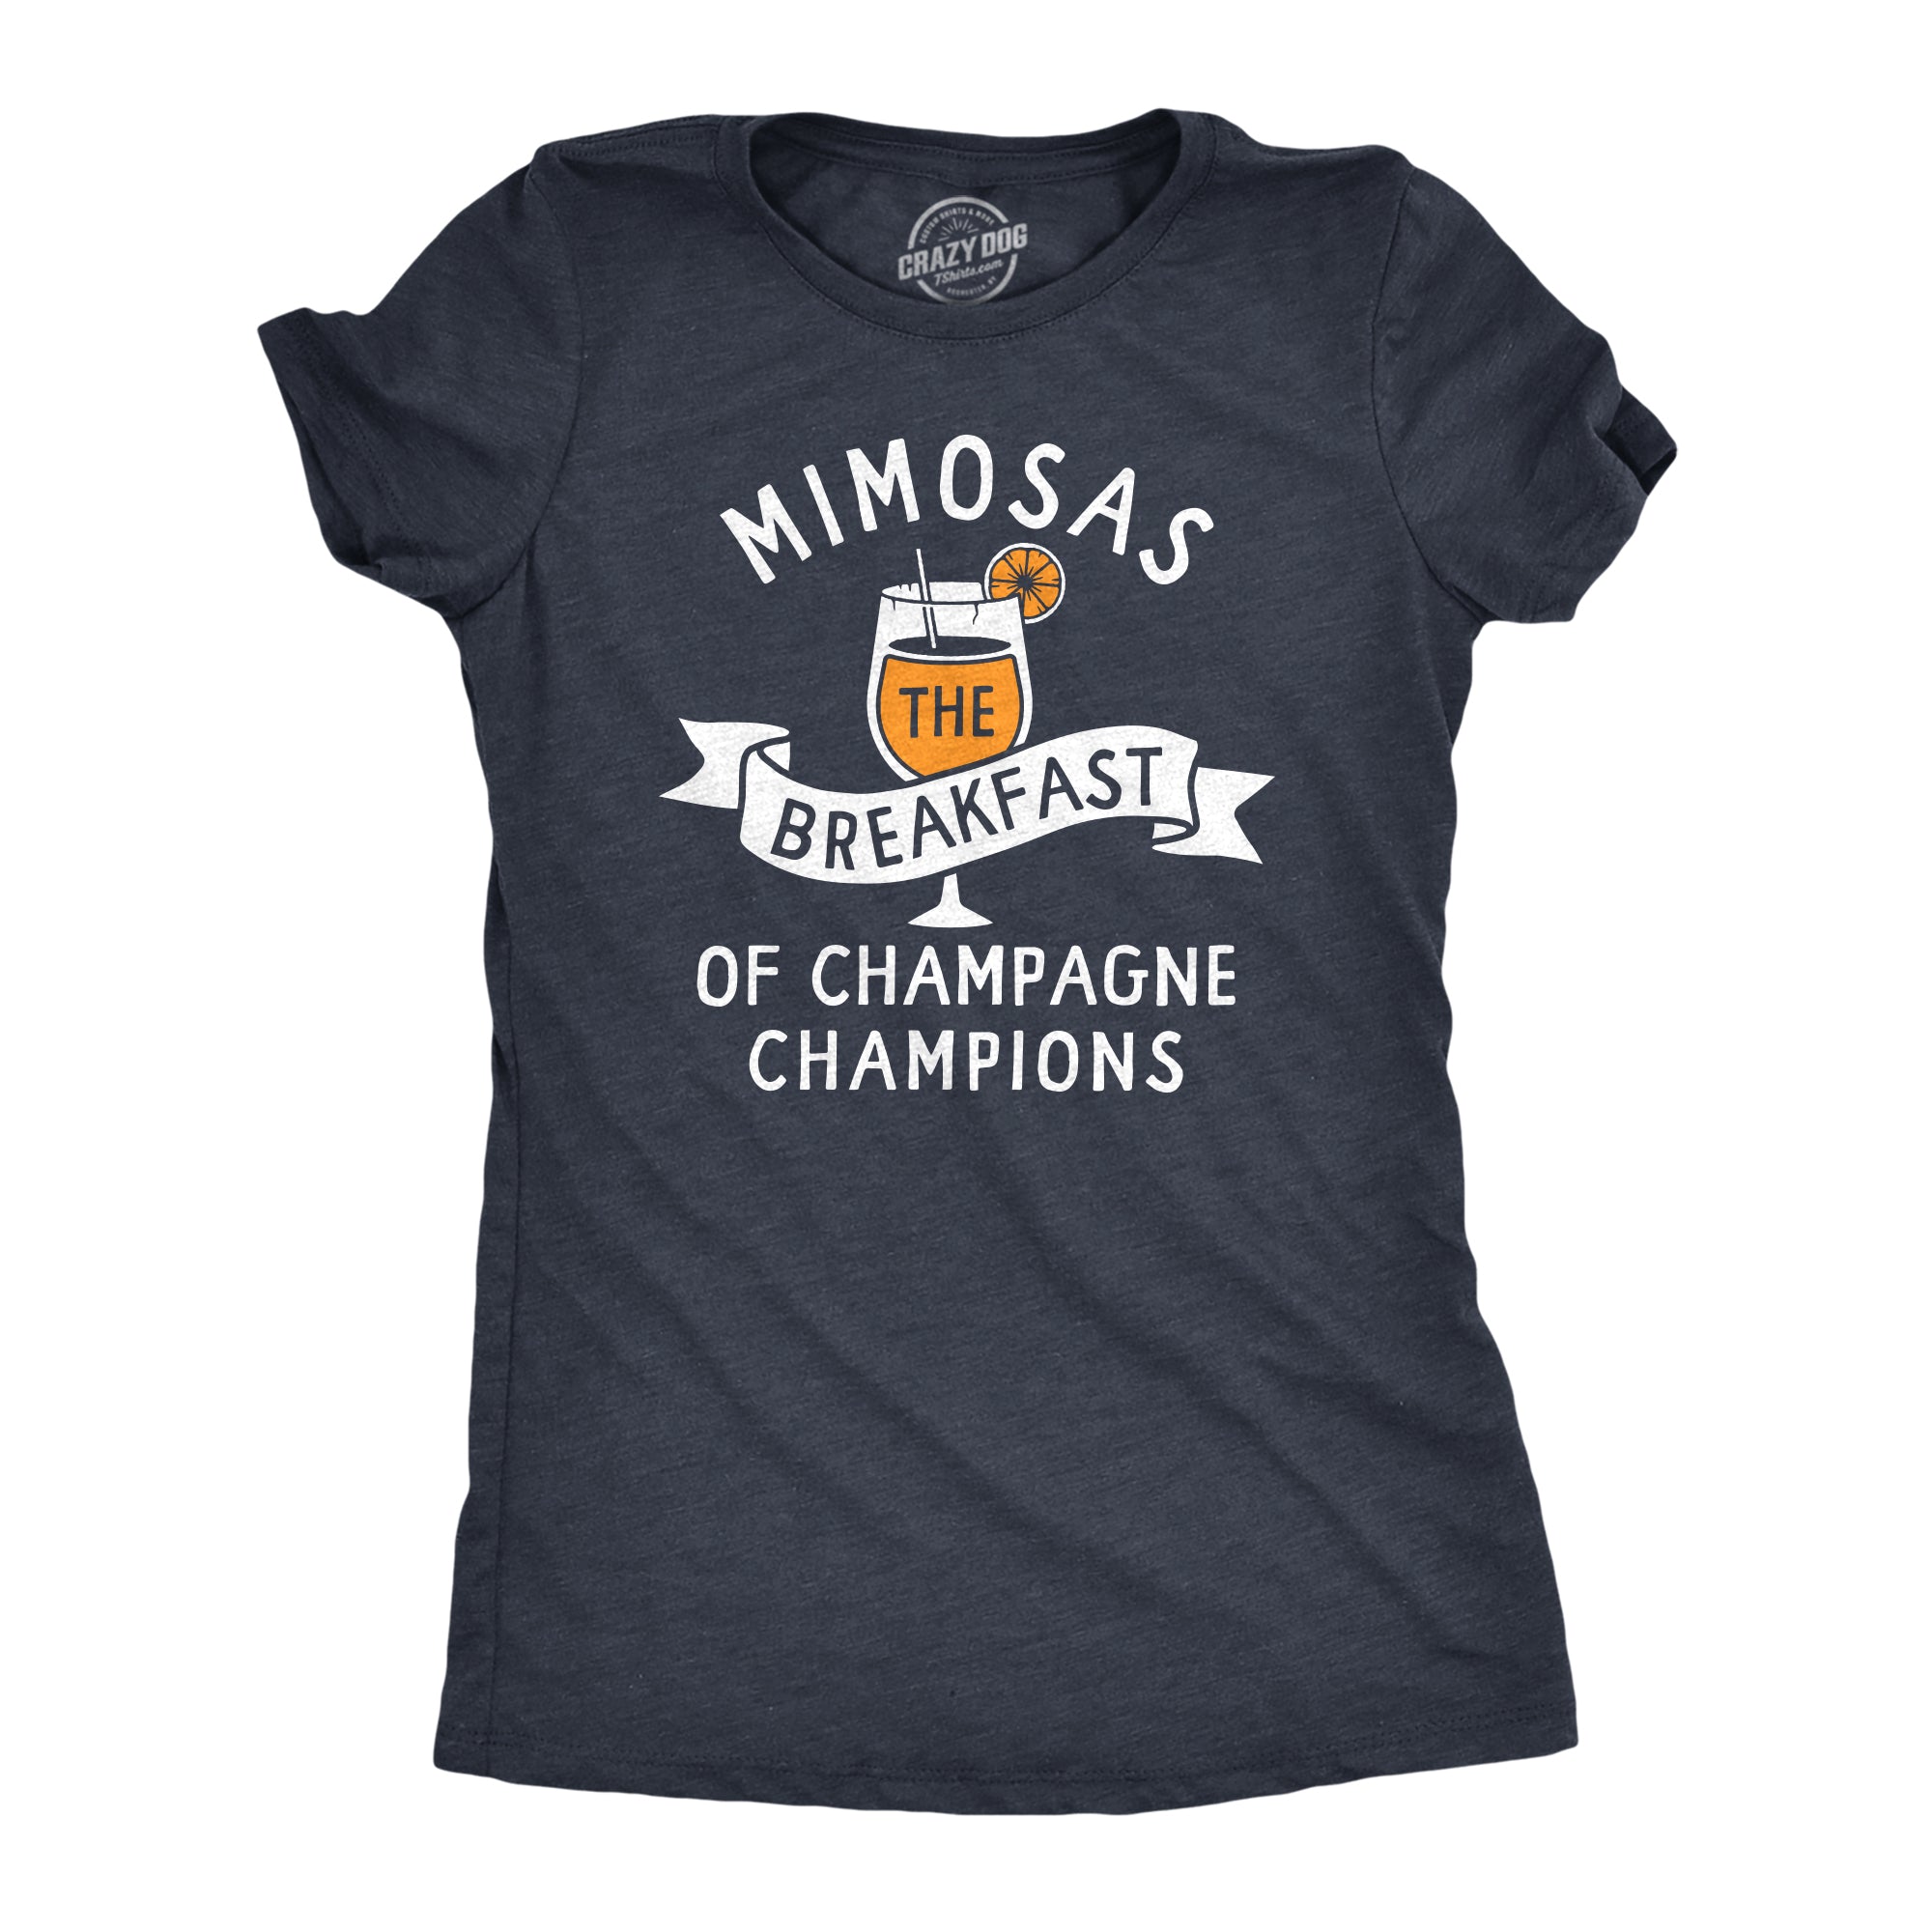 Funny Heather Navy - MIMOSAS Mimosas The Breakfast Of Champagne Champions Womens T Shirt Nerdy Drinking Tee